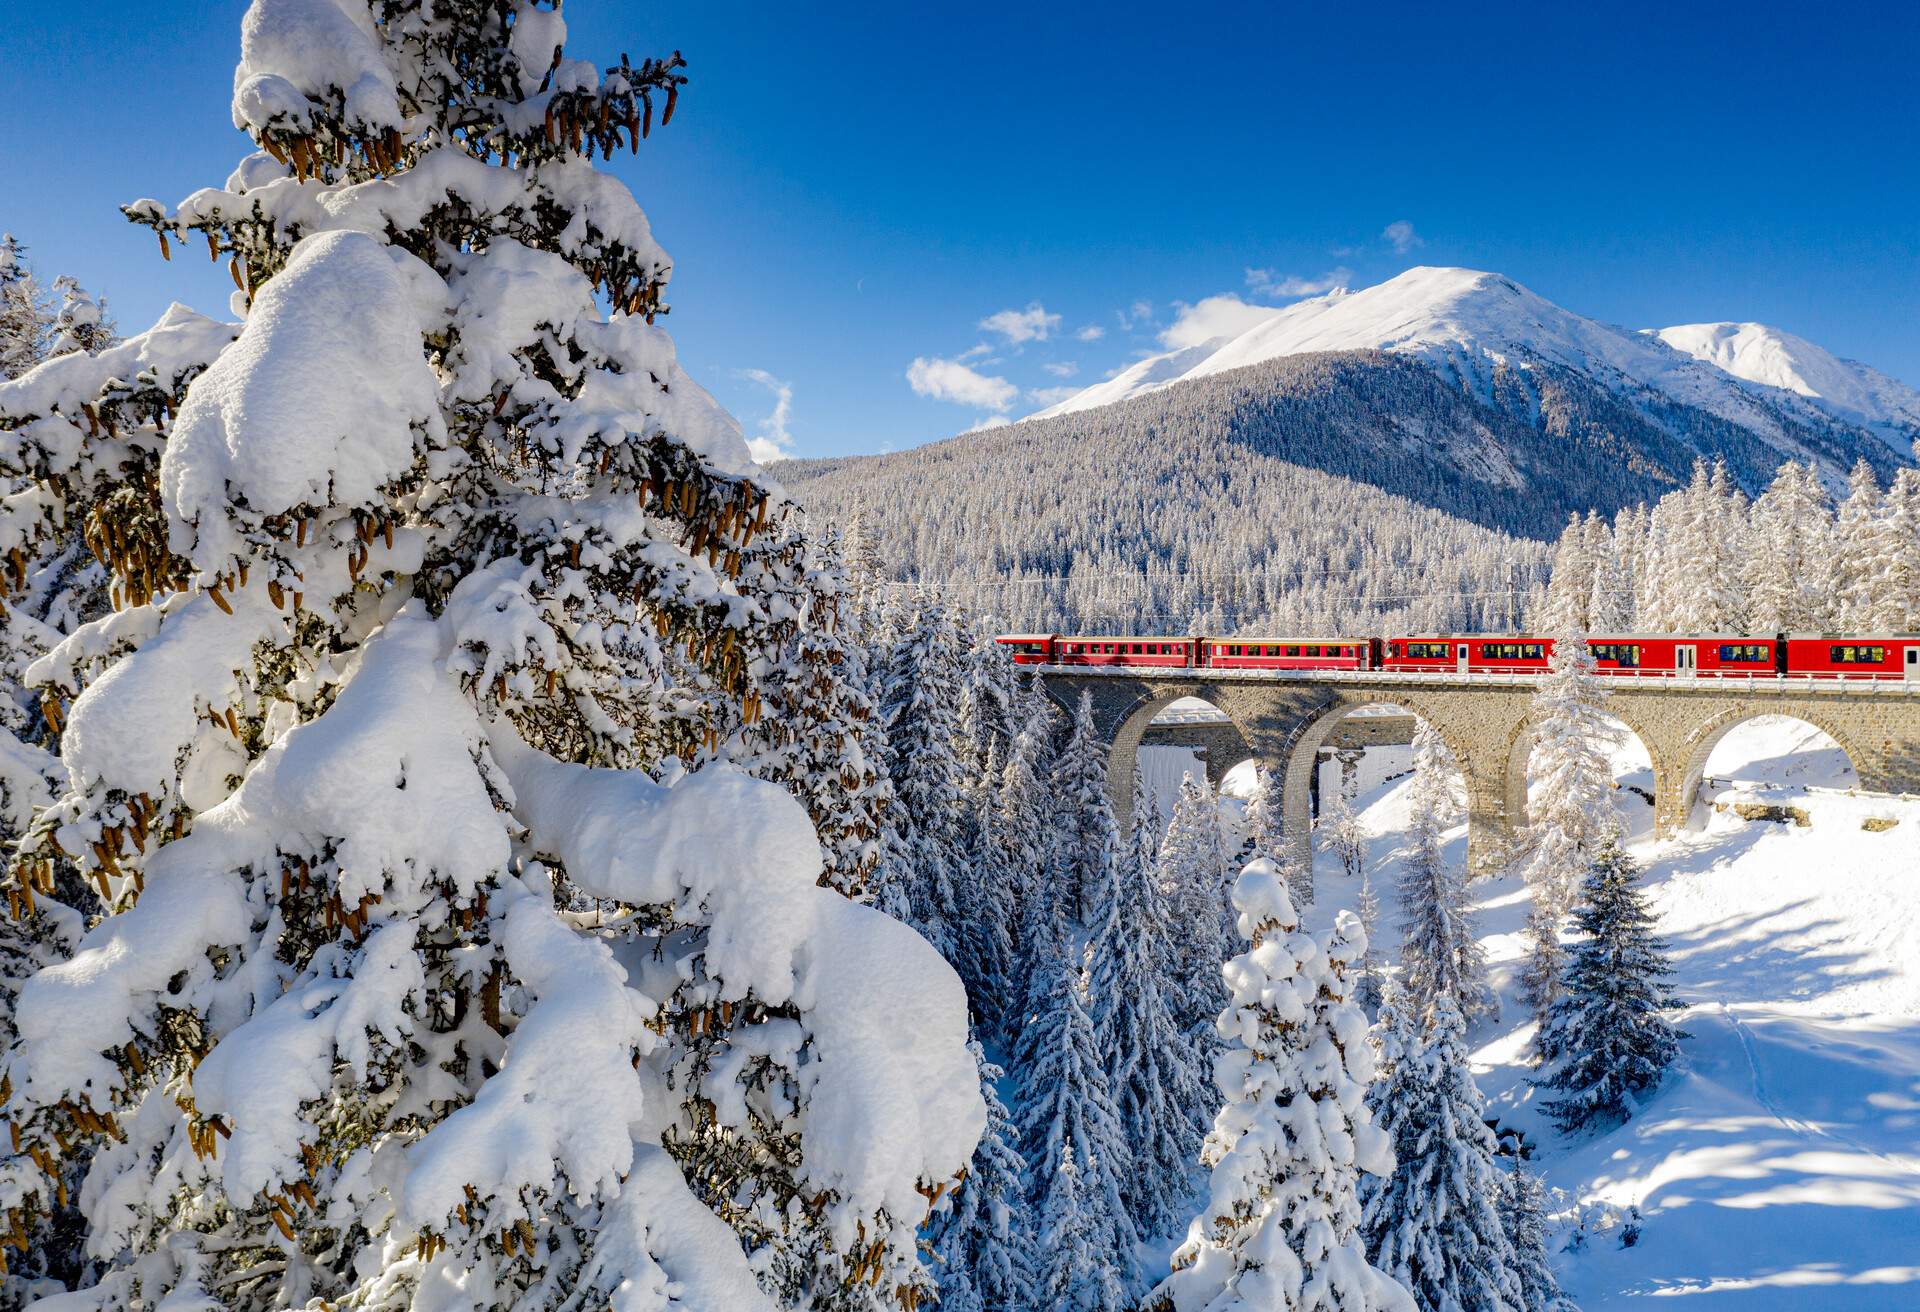 Clear sky on Bernina Express train crossing the forest covered with snow, Chapella, Graubunden canton, Engadine, Switzerland